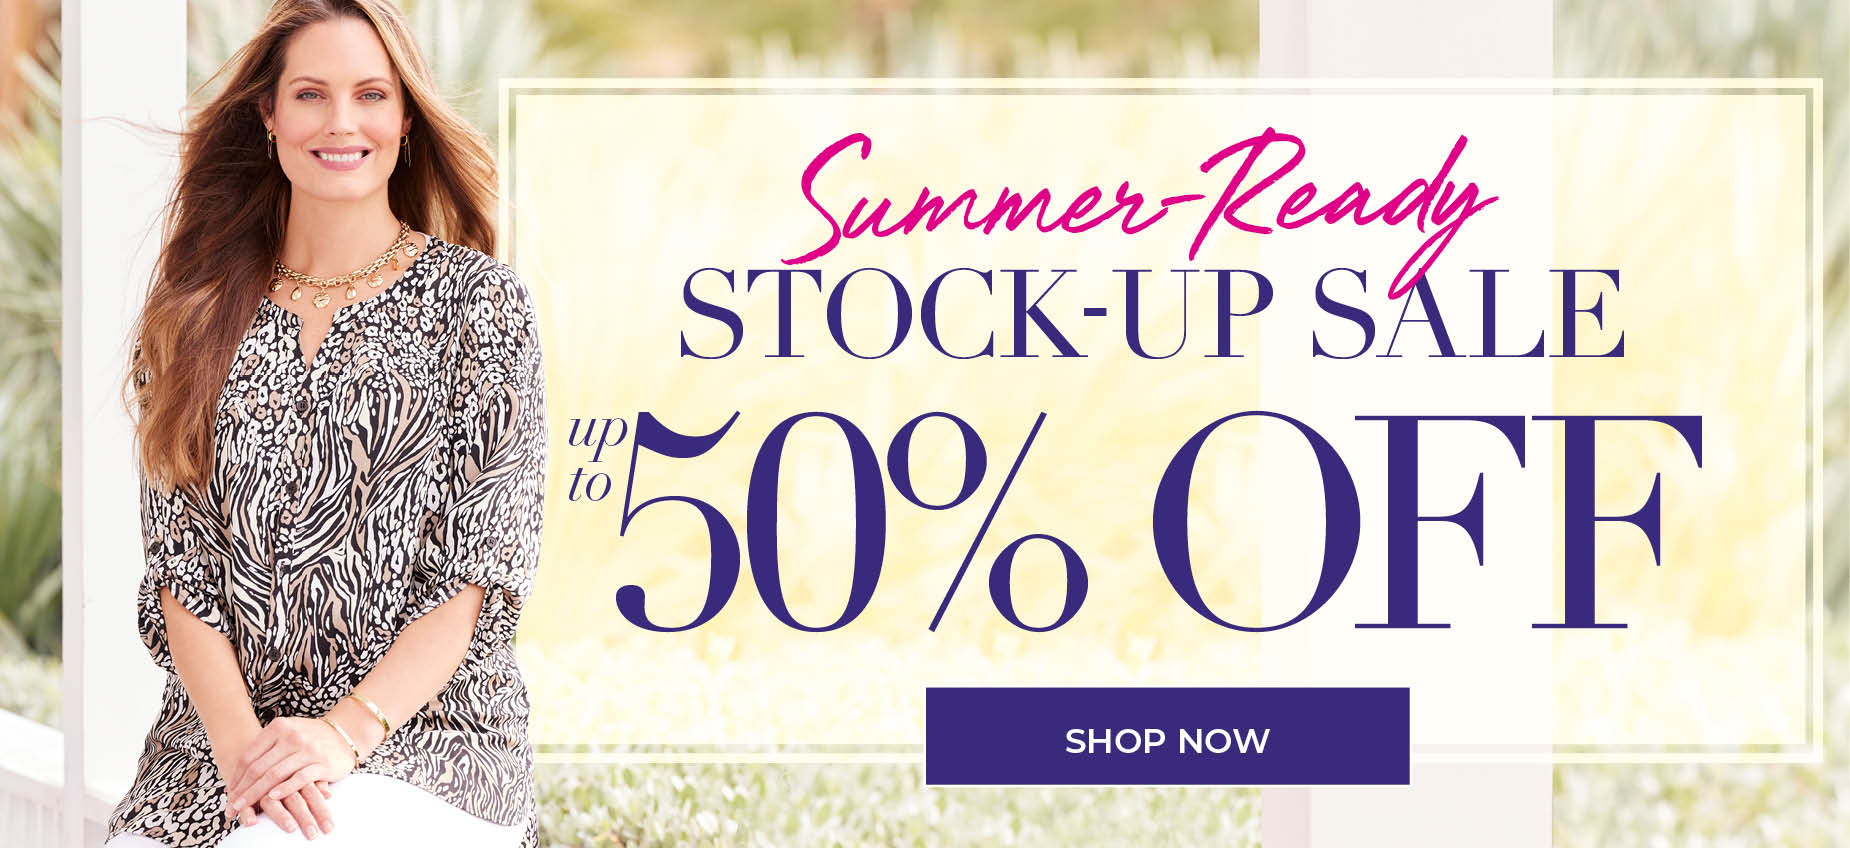 Summer Ready Stock Up Sale up to 50% OFF - SHOP THE SALE